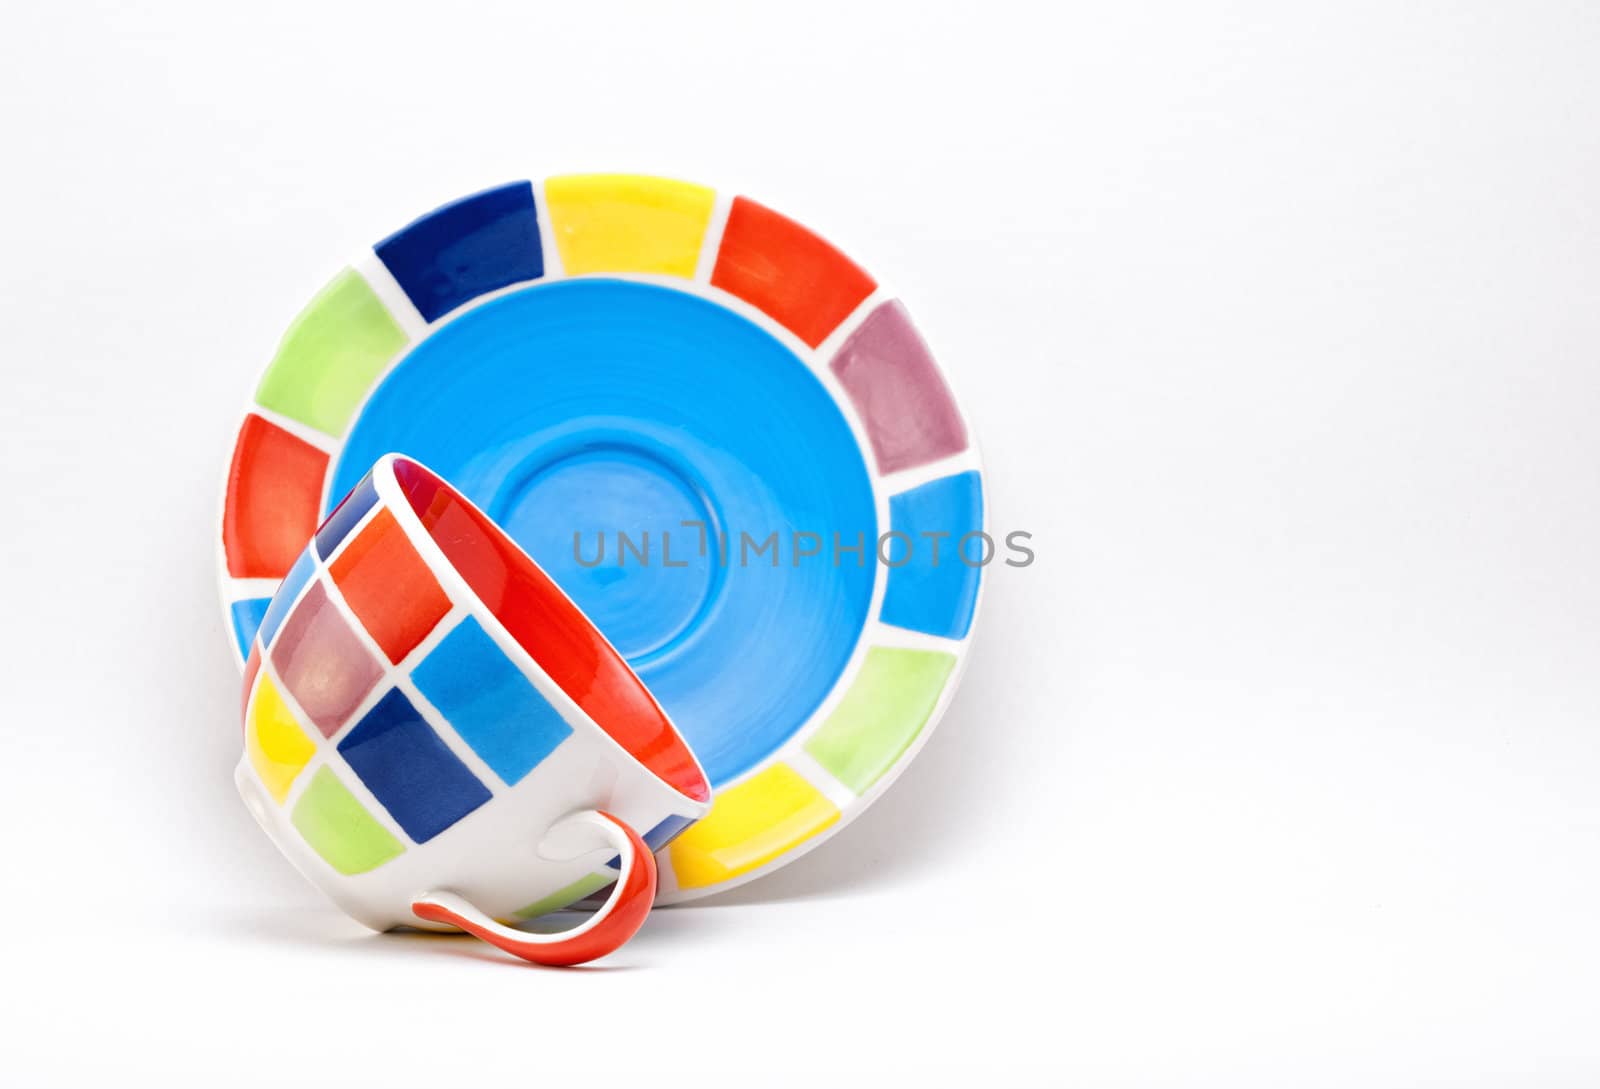 Colourful Checkered Cup on a White Background.